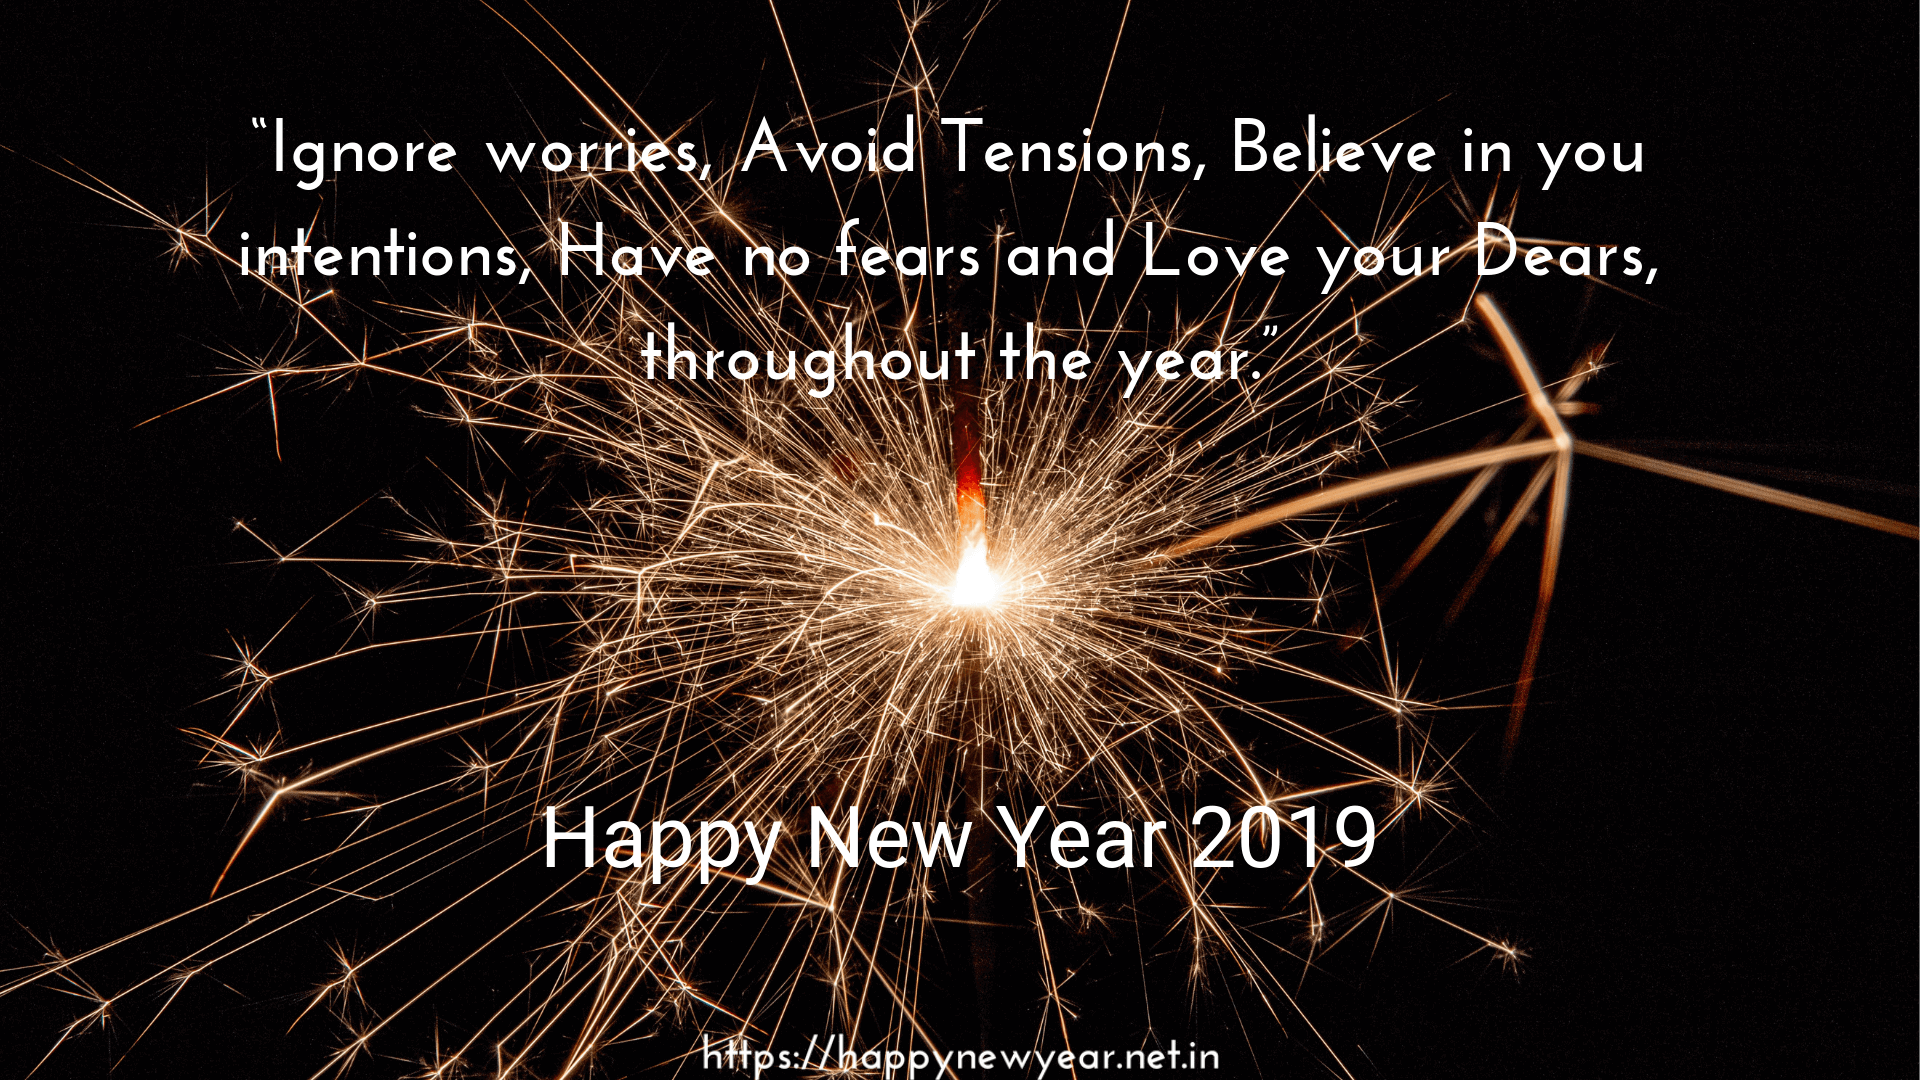 Happy New Year Images Free Happy New Year Images Free - Free Download Happy New Year 2019 , HD Wallpaper & Backgrounds